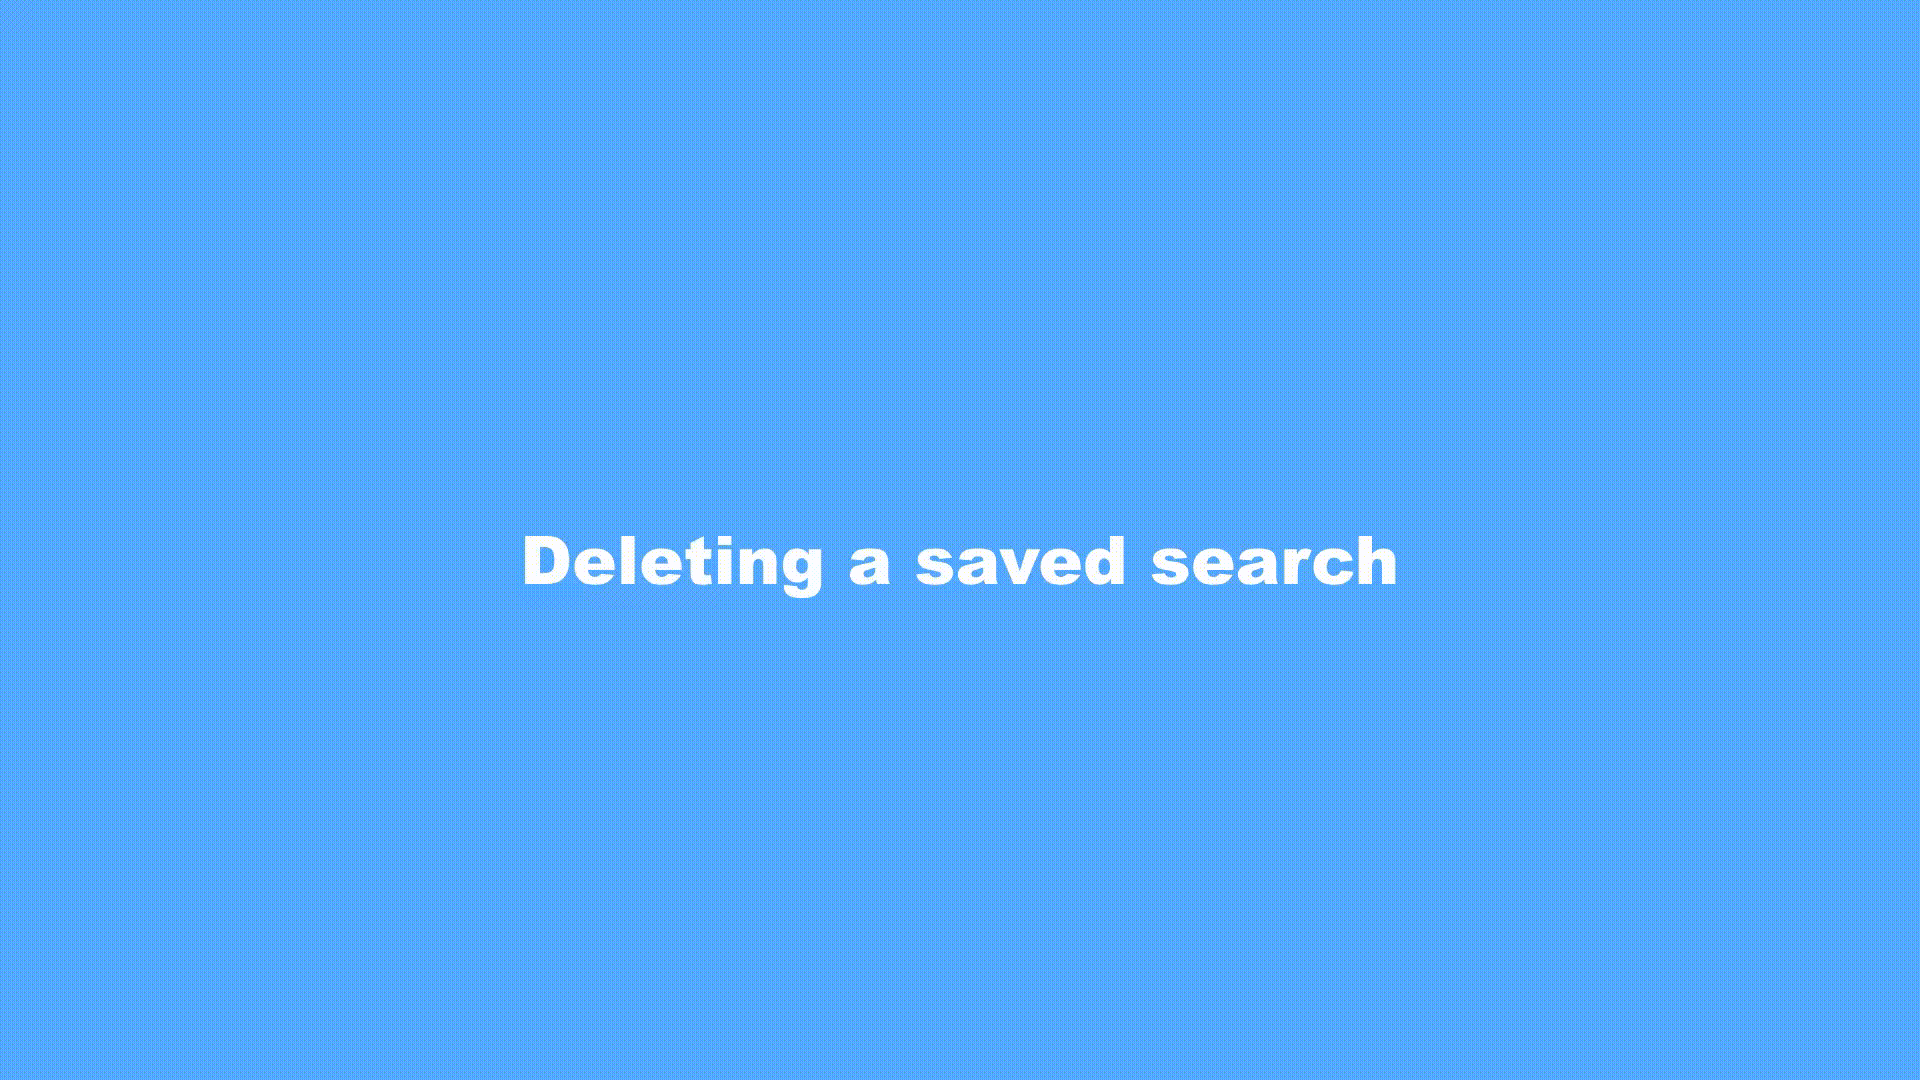 animation showing steps to delete a saved search